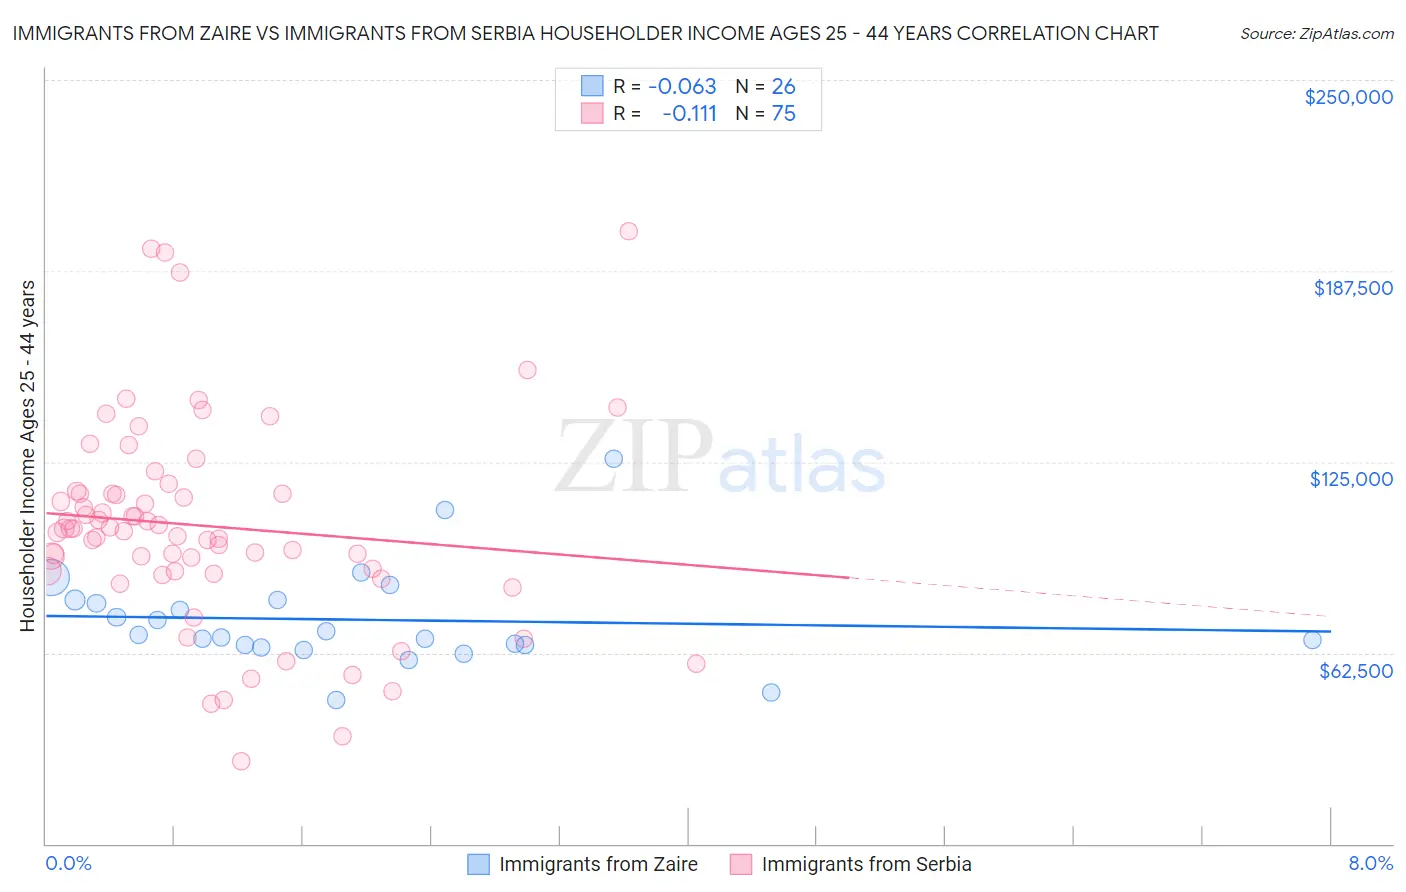 Immigrants from Zaire vs Immigrants from Serbia Householder Income Ages 25 - 44 years